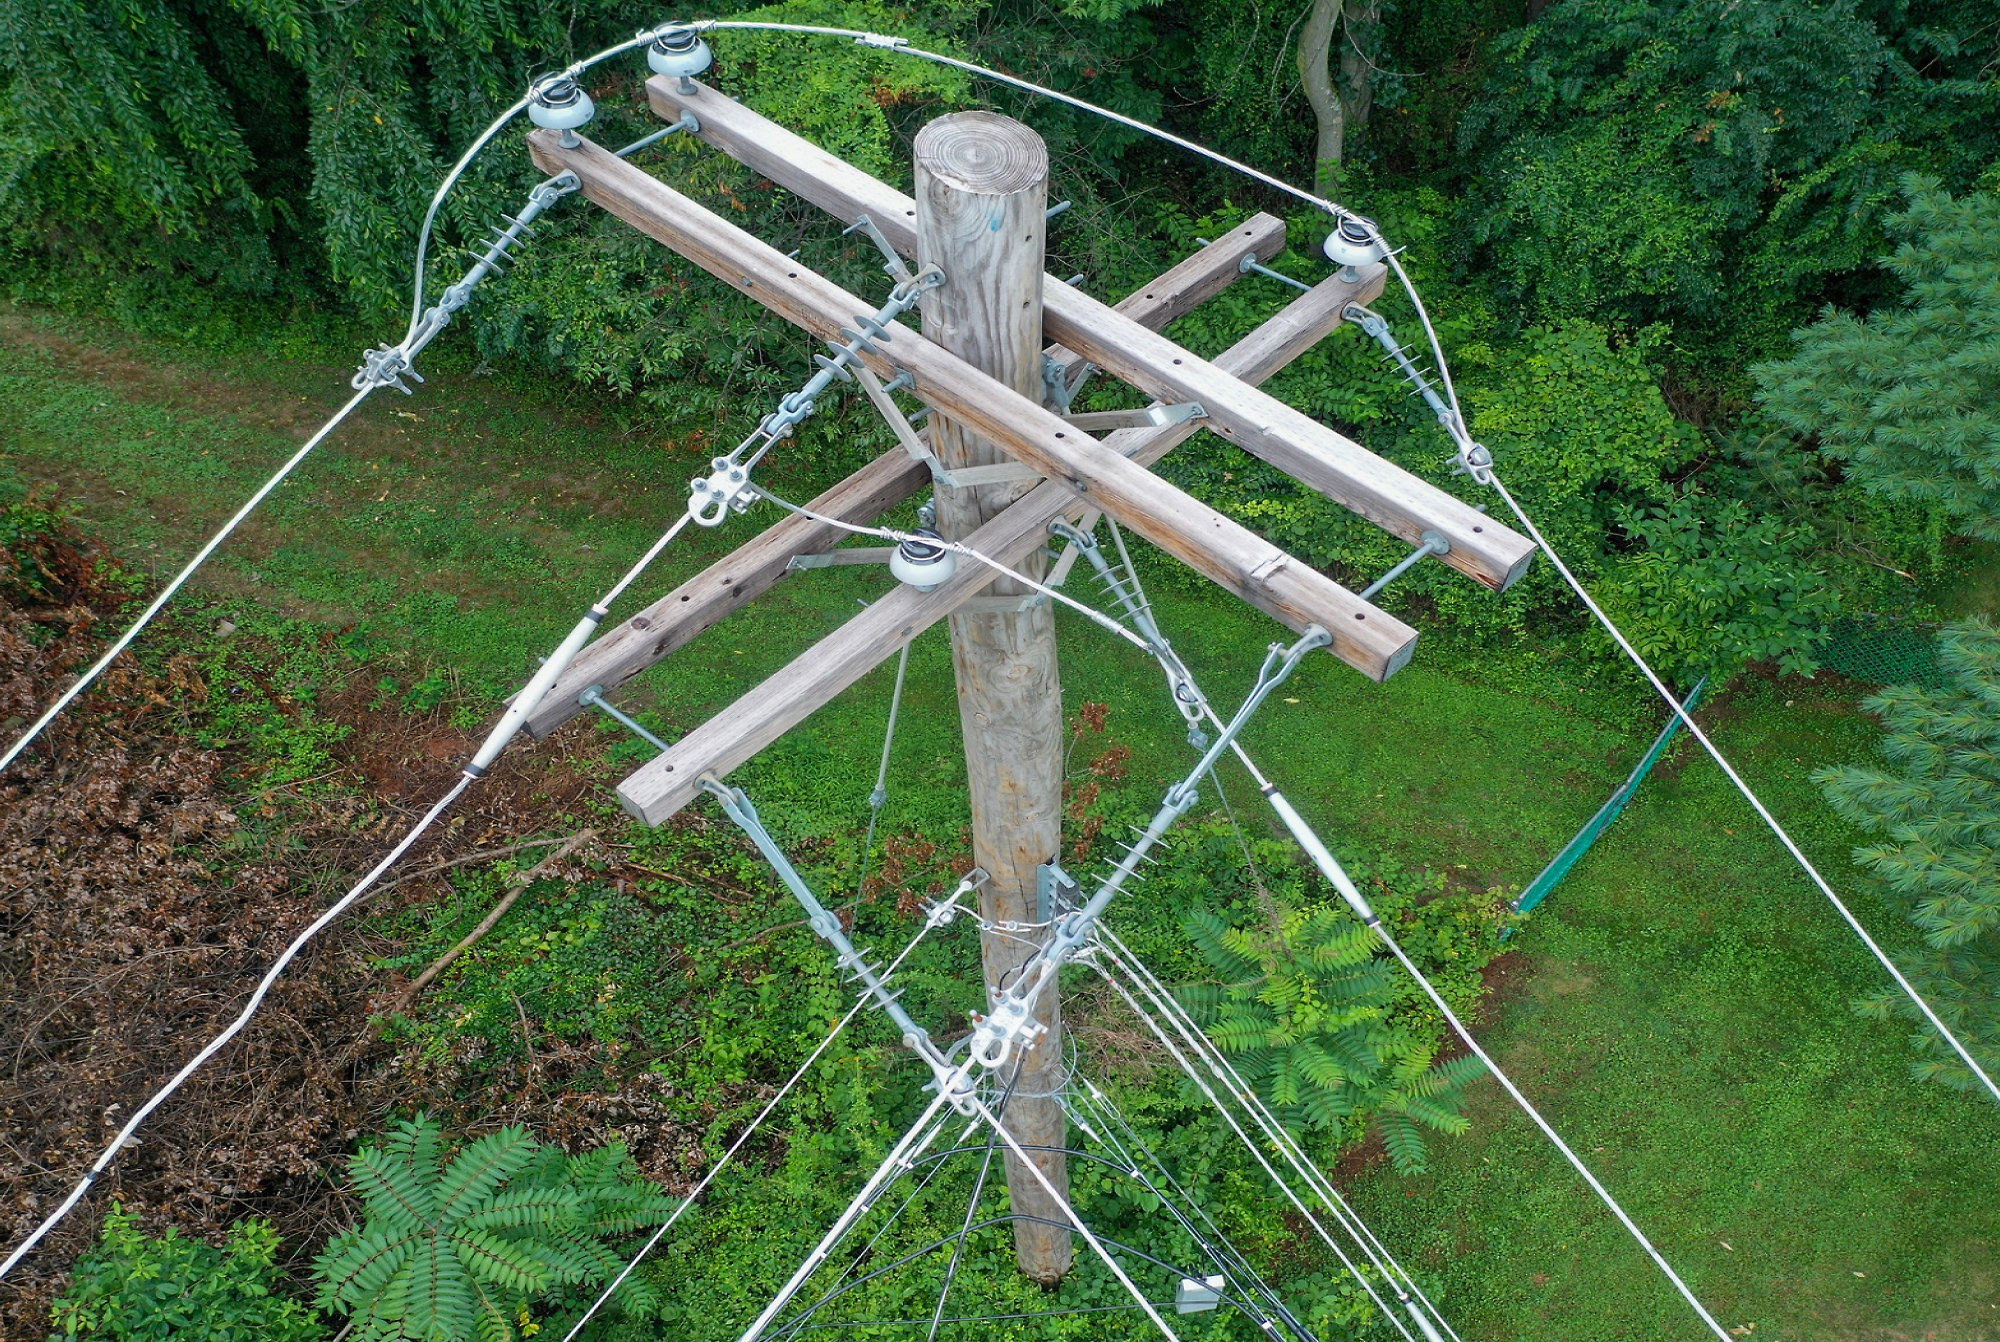 Aerial view of a wooden utility pole with multiple wires and insulators surrounded by green foliage.